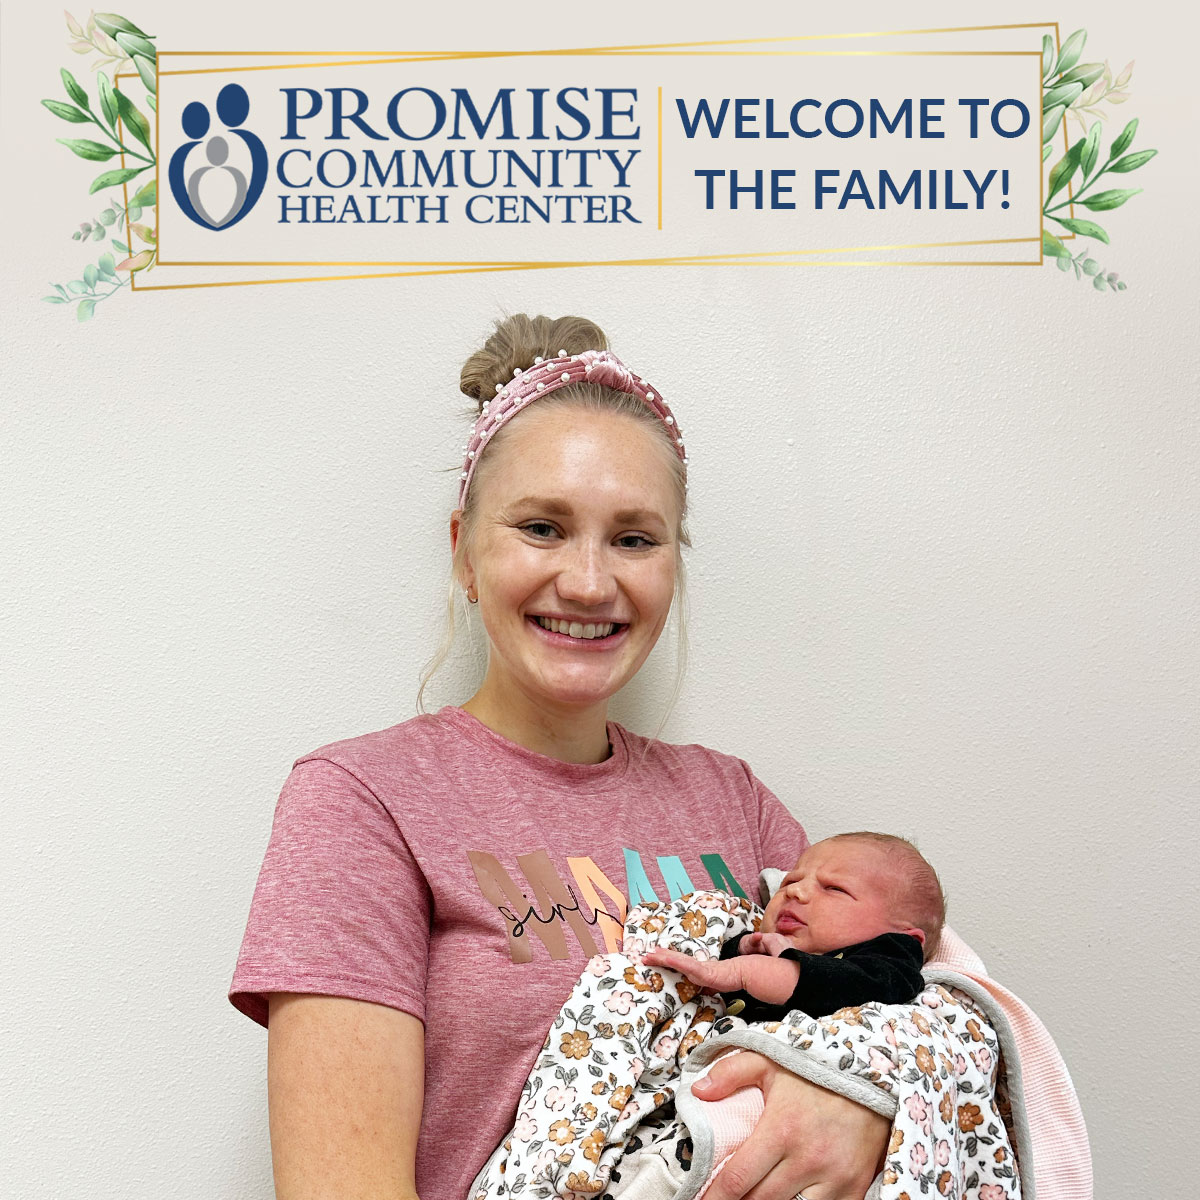 Home birth in Sheldon, Iowa | Promise Community Health Center in Sioux Center, Iowa | Midwives in northwest Iowa, Midwives in southeast South Dakota, Midwives in southwest Minnesota | Midwives in Sioux Falls South Dakota, Midwives in Beresford South Dakota, Midwives in Sioux City IA, Midwives in LeMars IA, Midwives in Worthington MN, Midwives in Iowa, Midwives in South Dakota, Midwives in Minnesota